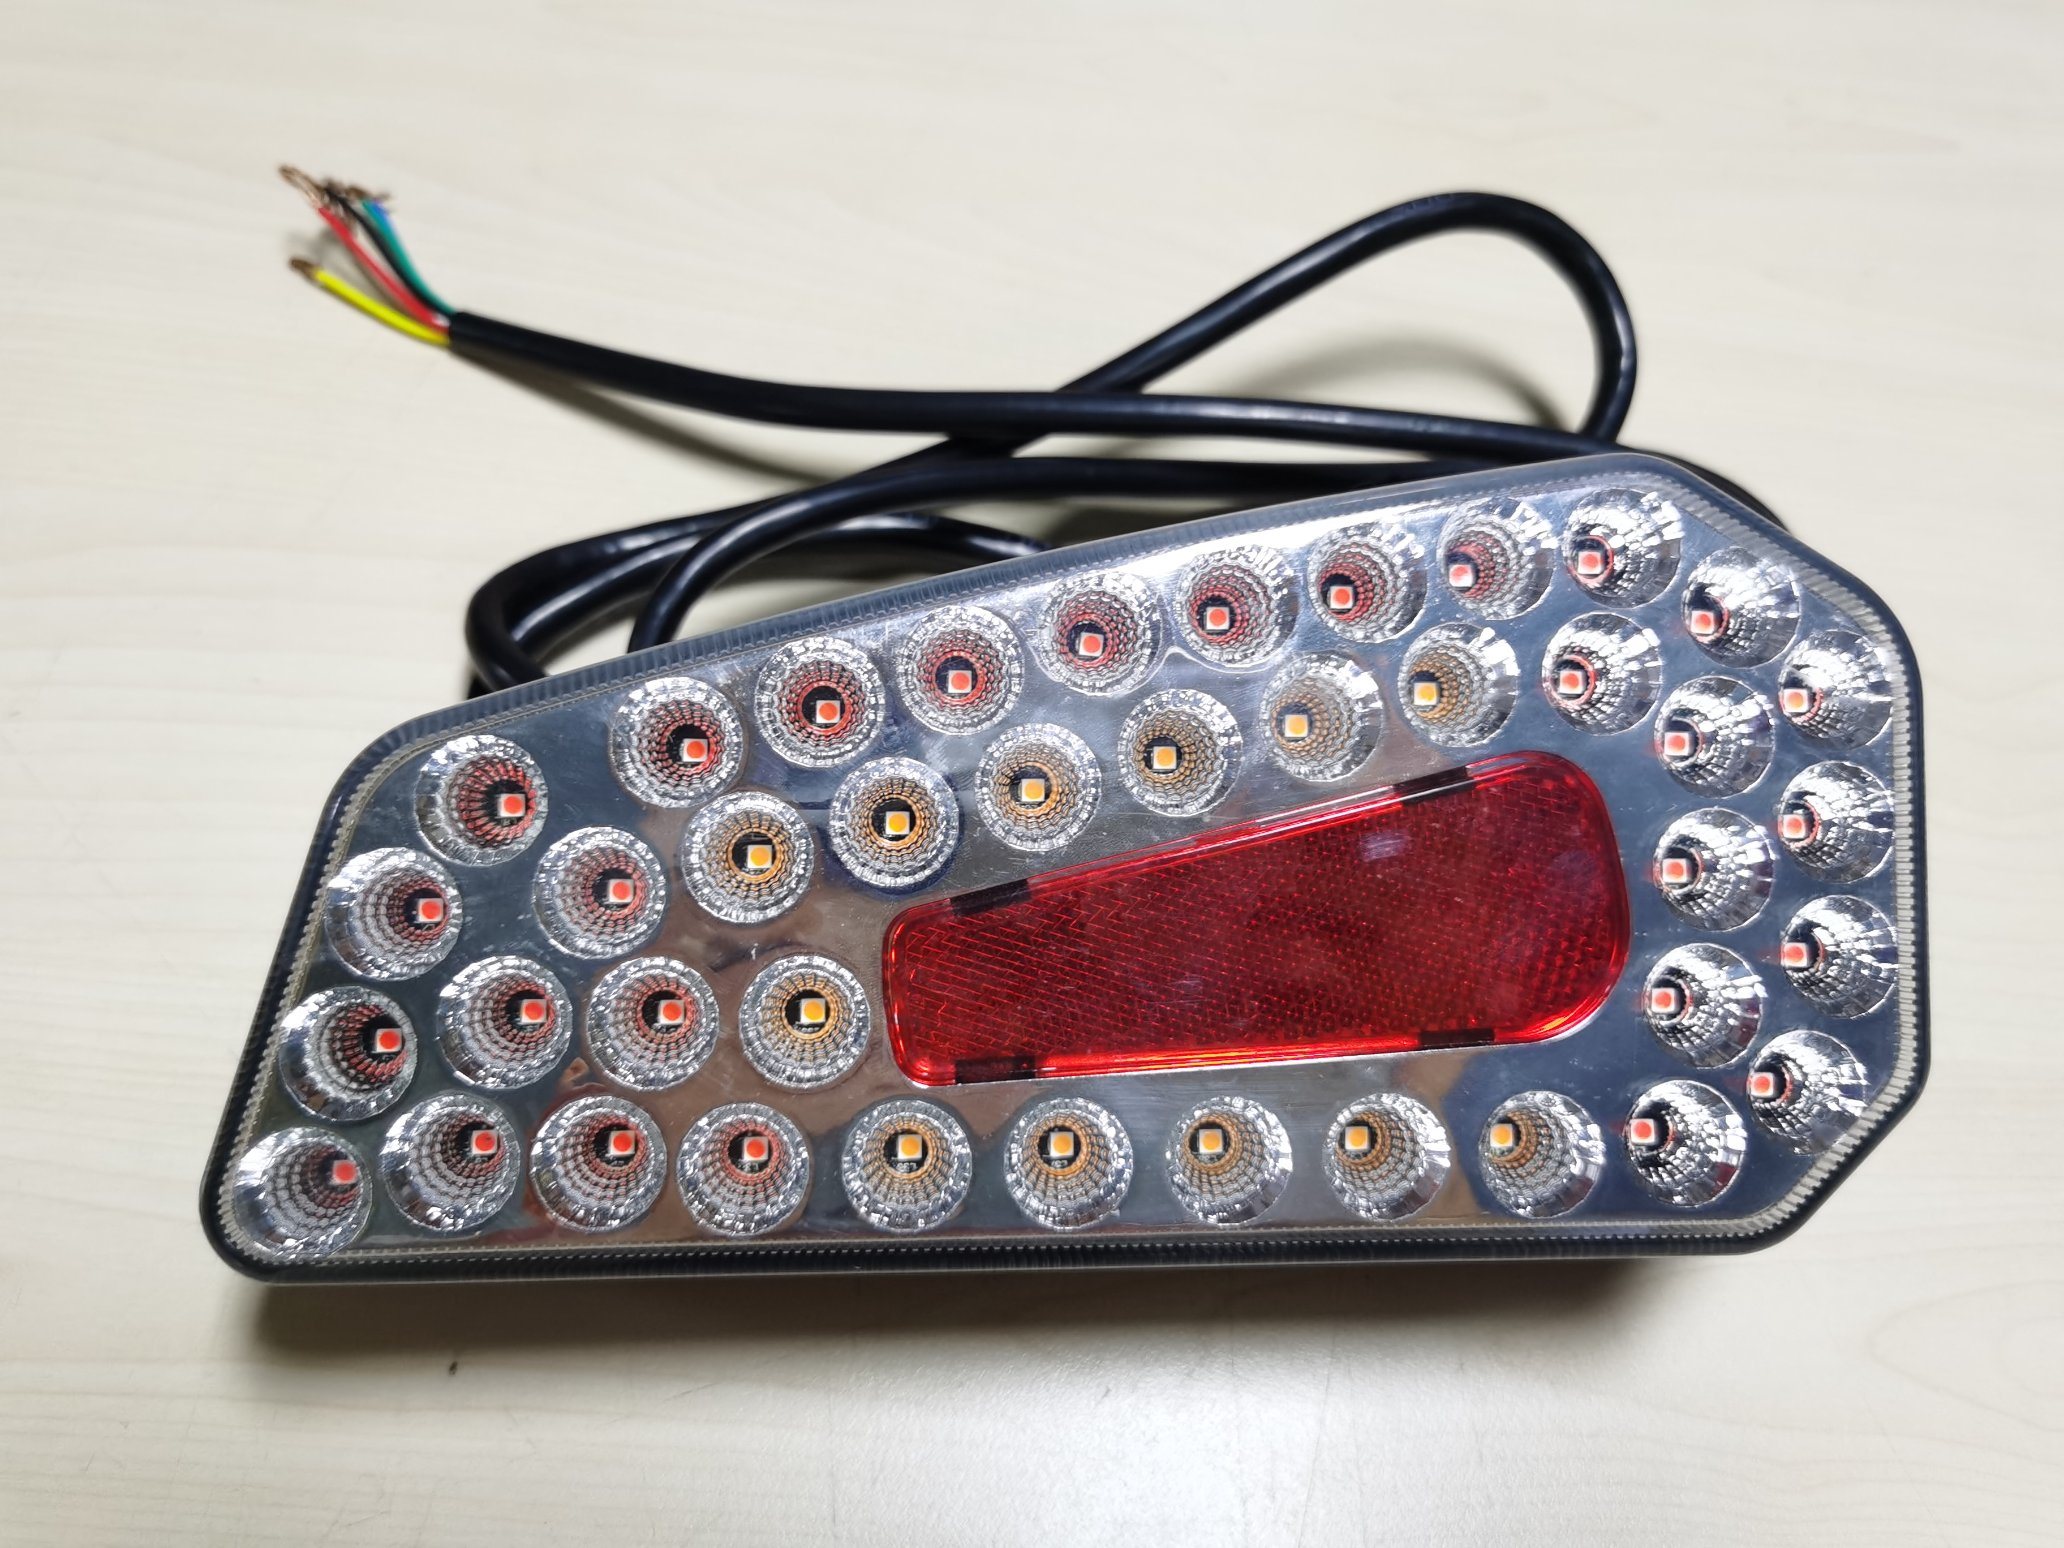 New Auto Rear Lamp for Bike Carriers/Racks Position/Stop/Fog/Reverse/Direction/Plate LED Tail Light